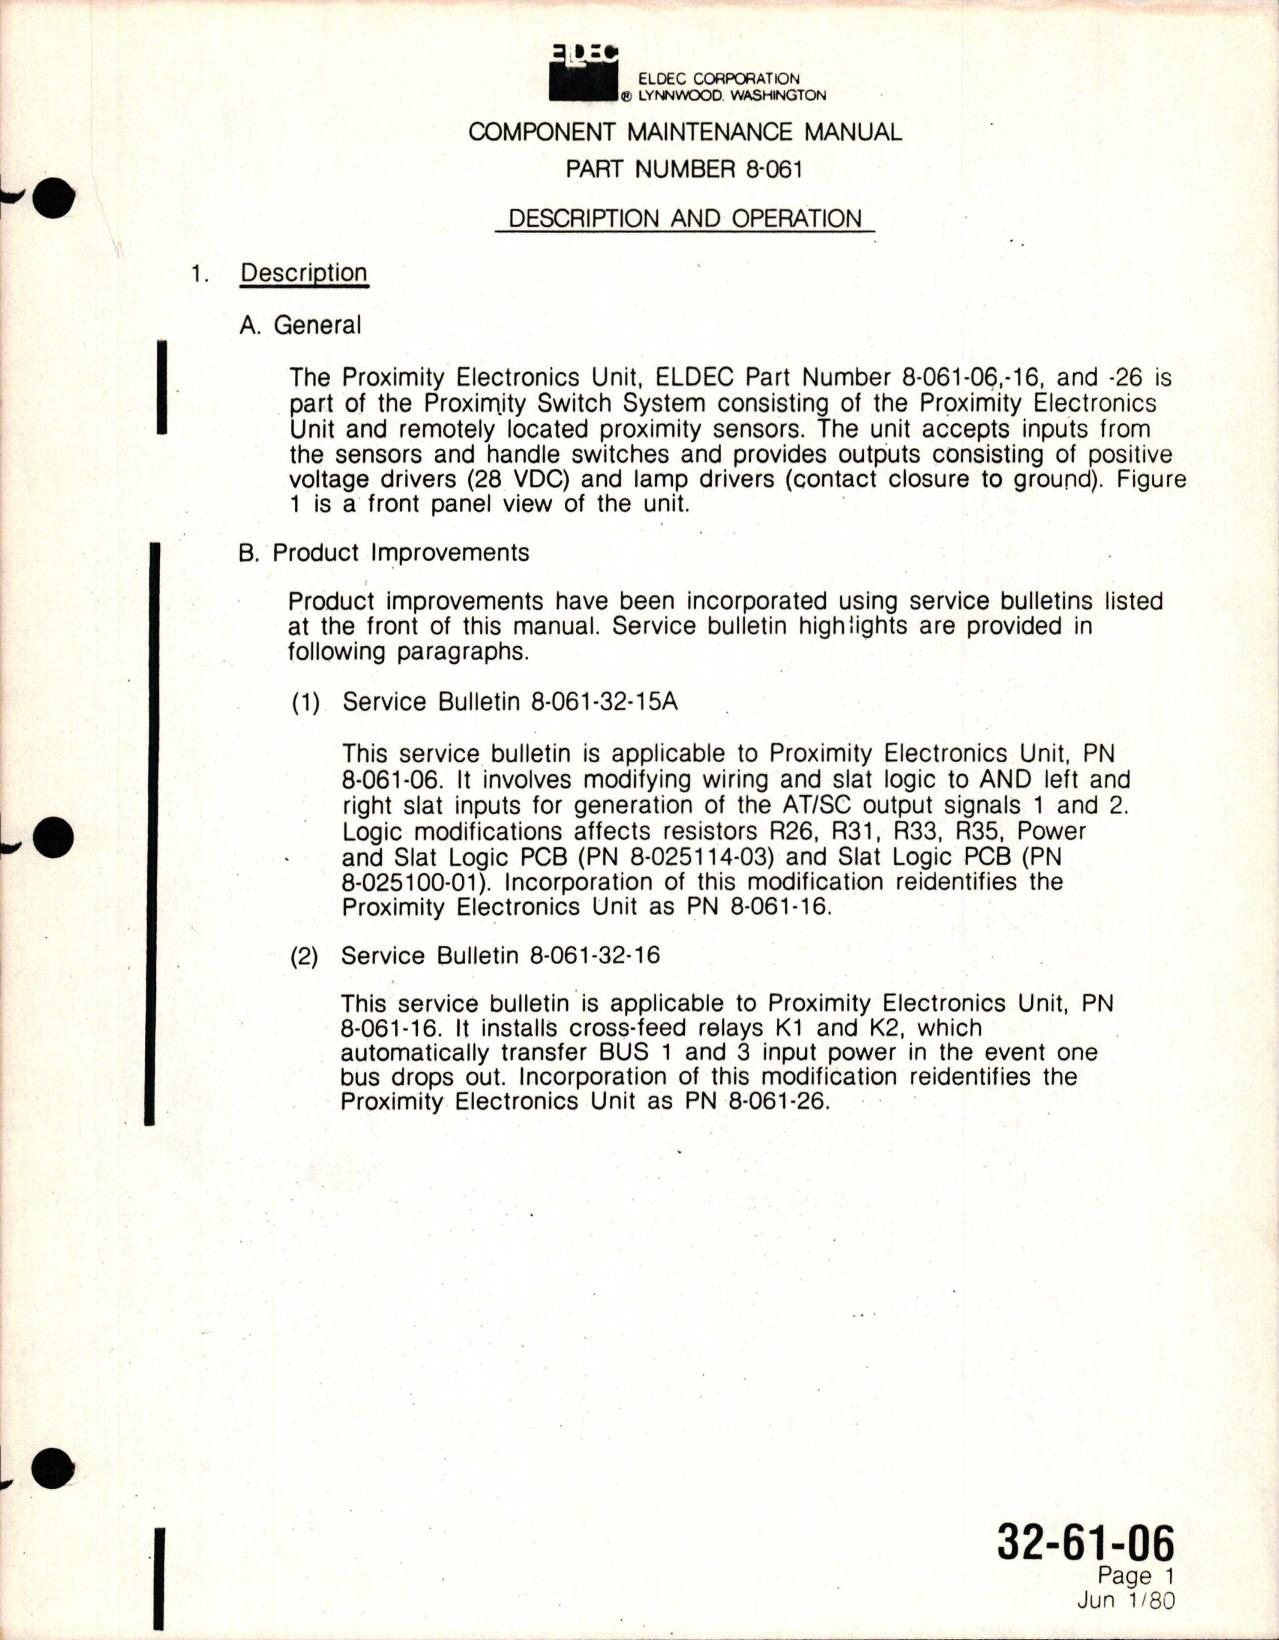 Sample page 8 from AirCorps Library document: Maintenance Manual with Illustrated Parts List for Proximity Electronics Unit - Parts 8-061-06, 8-061-16, and 8-061-26 